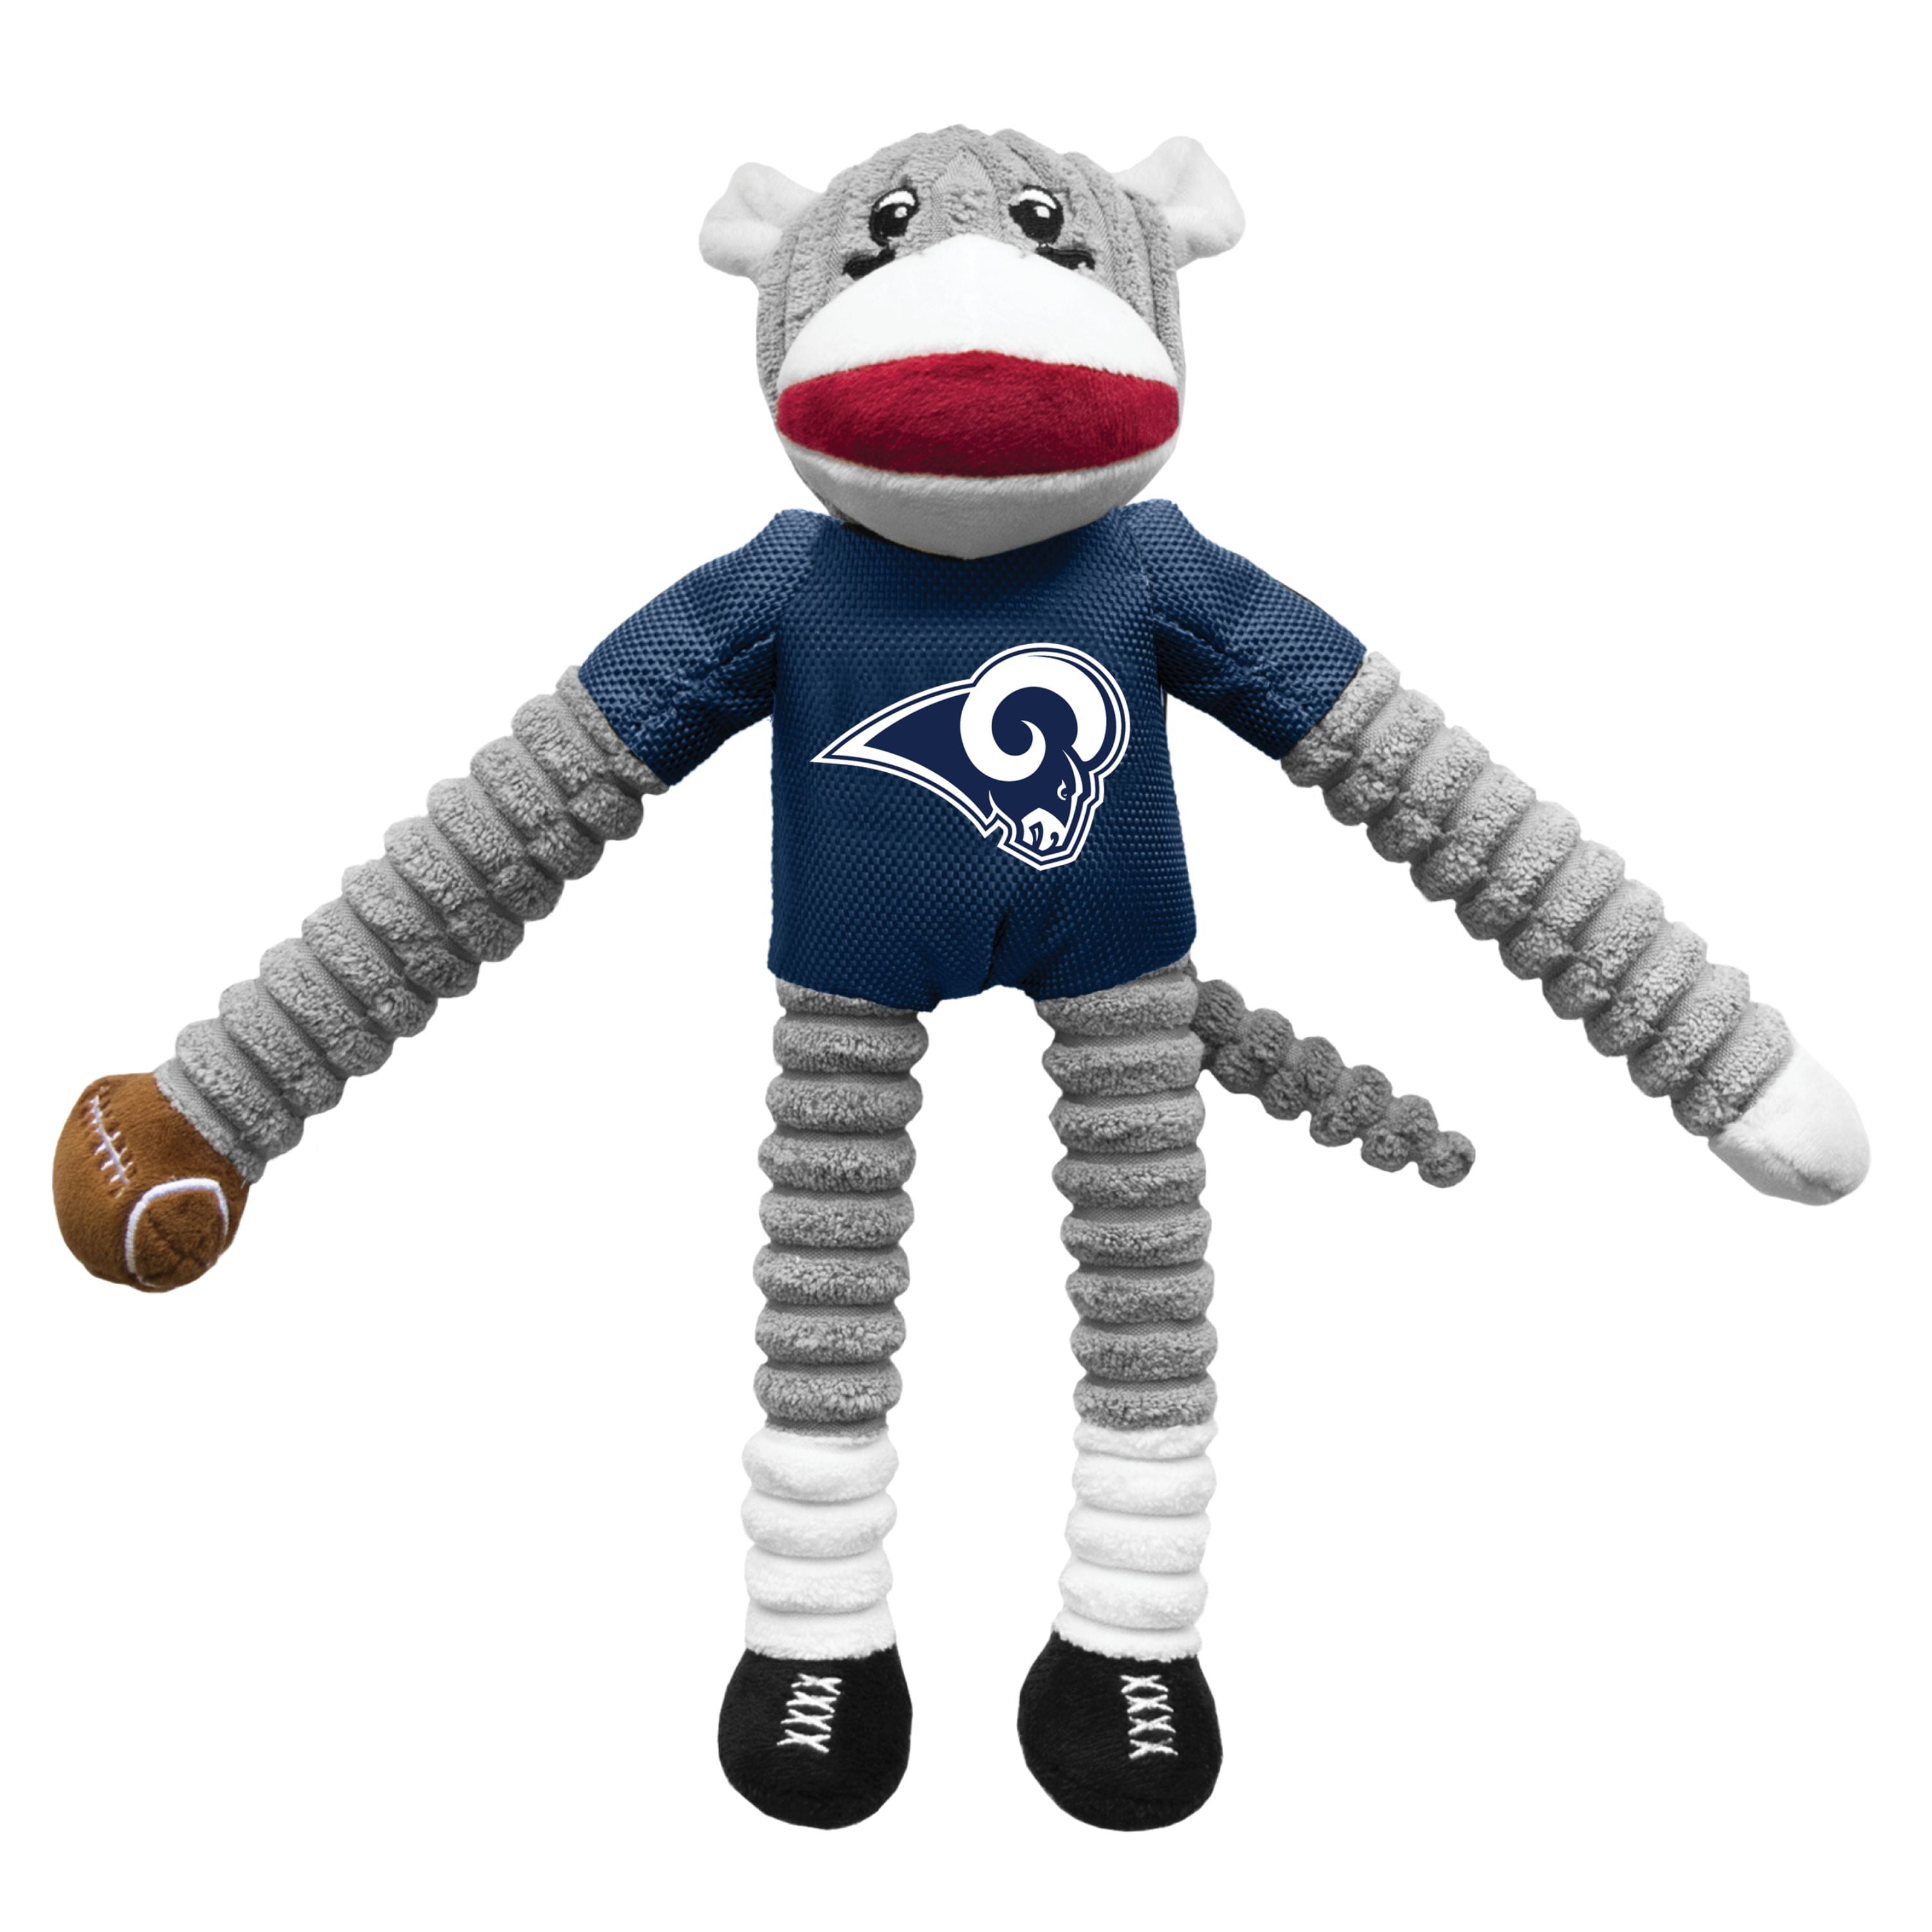  Littlearth Unisex-Adult NFL Las Vegas Raiders Sock Monkey and  Flying Disc Pet Toy Combo Set, Team Color, One Size : Sports & Outdoors